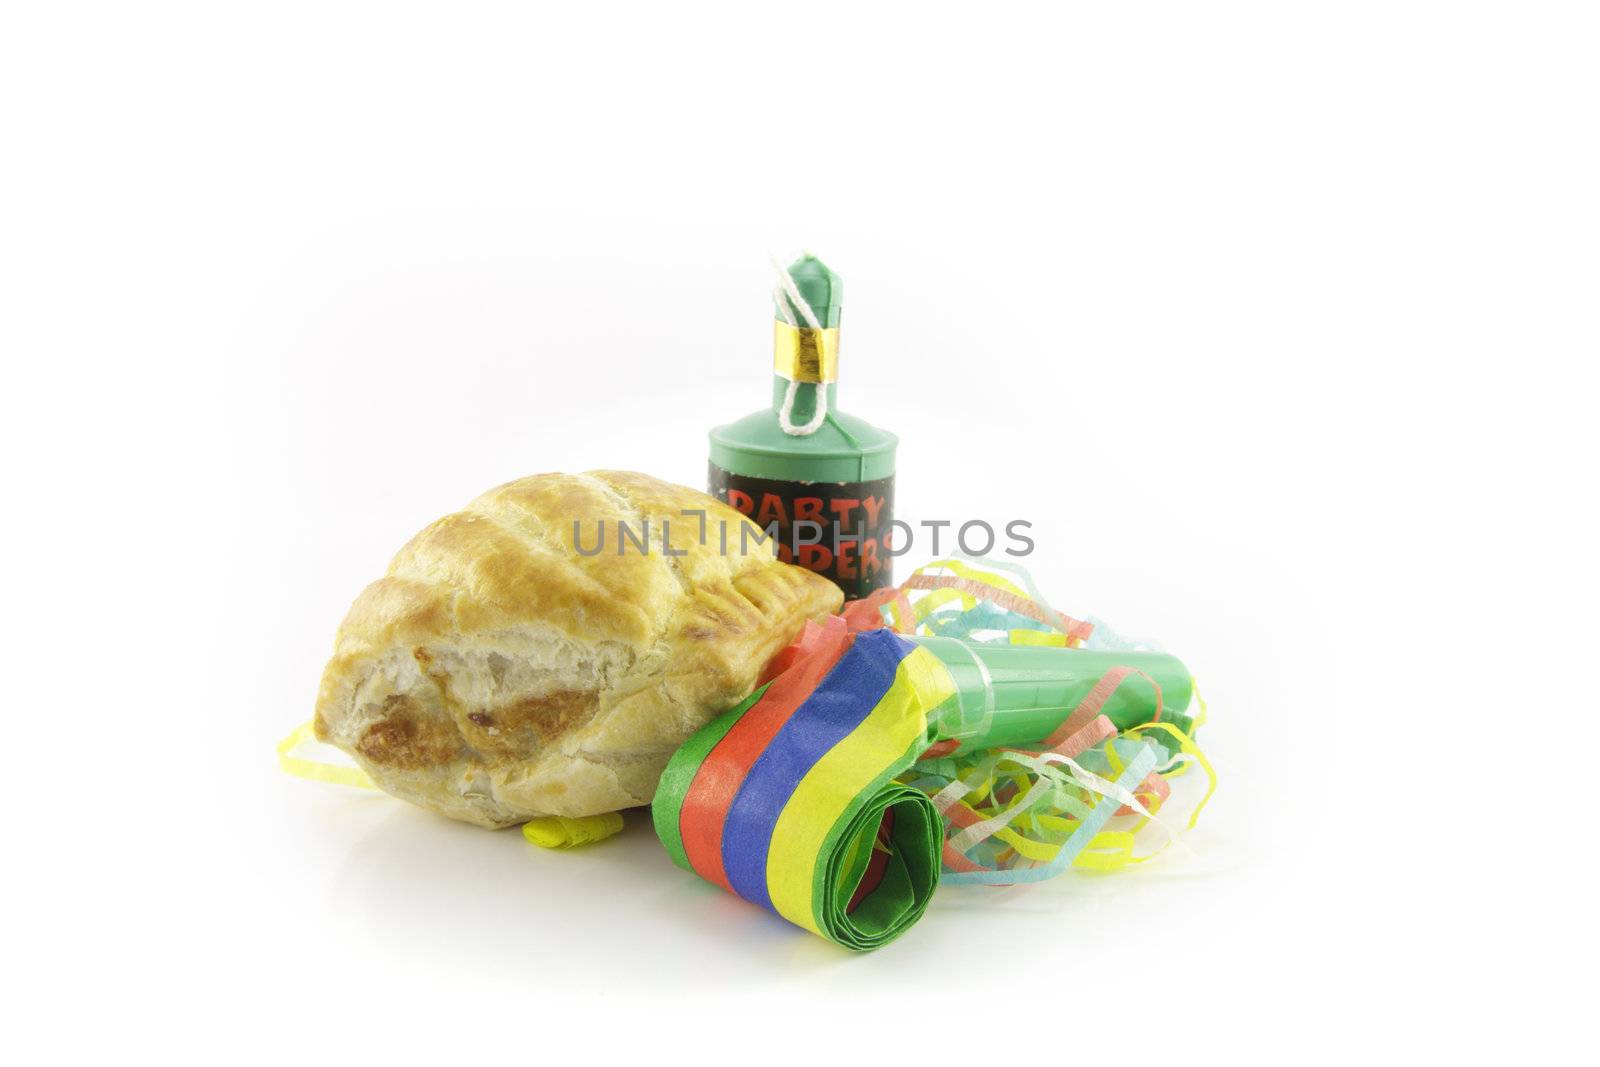 Small tasty sausage roll with party blower and party popper with streamers on a reflective white background